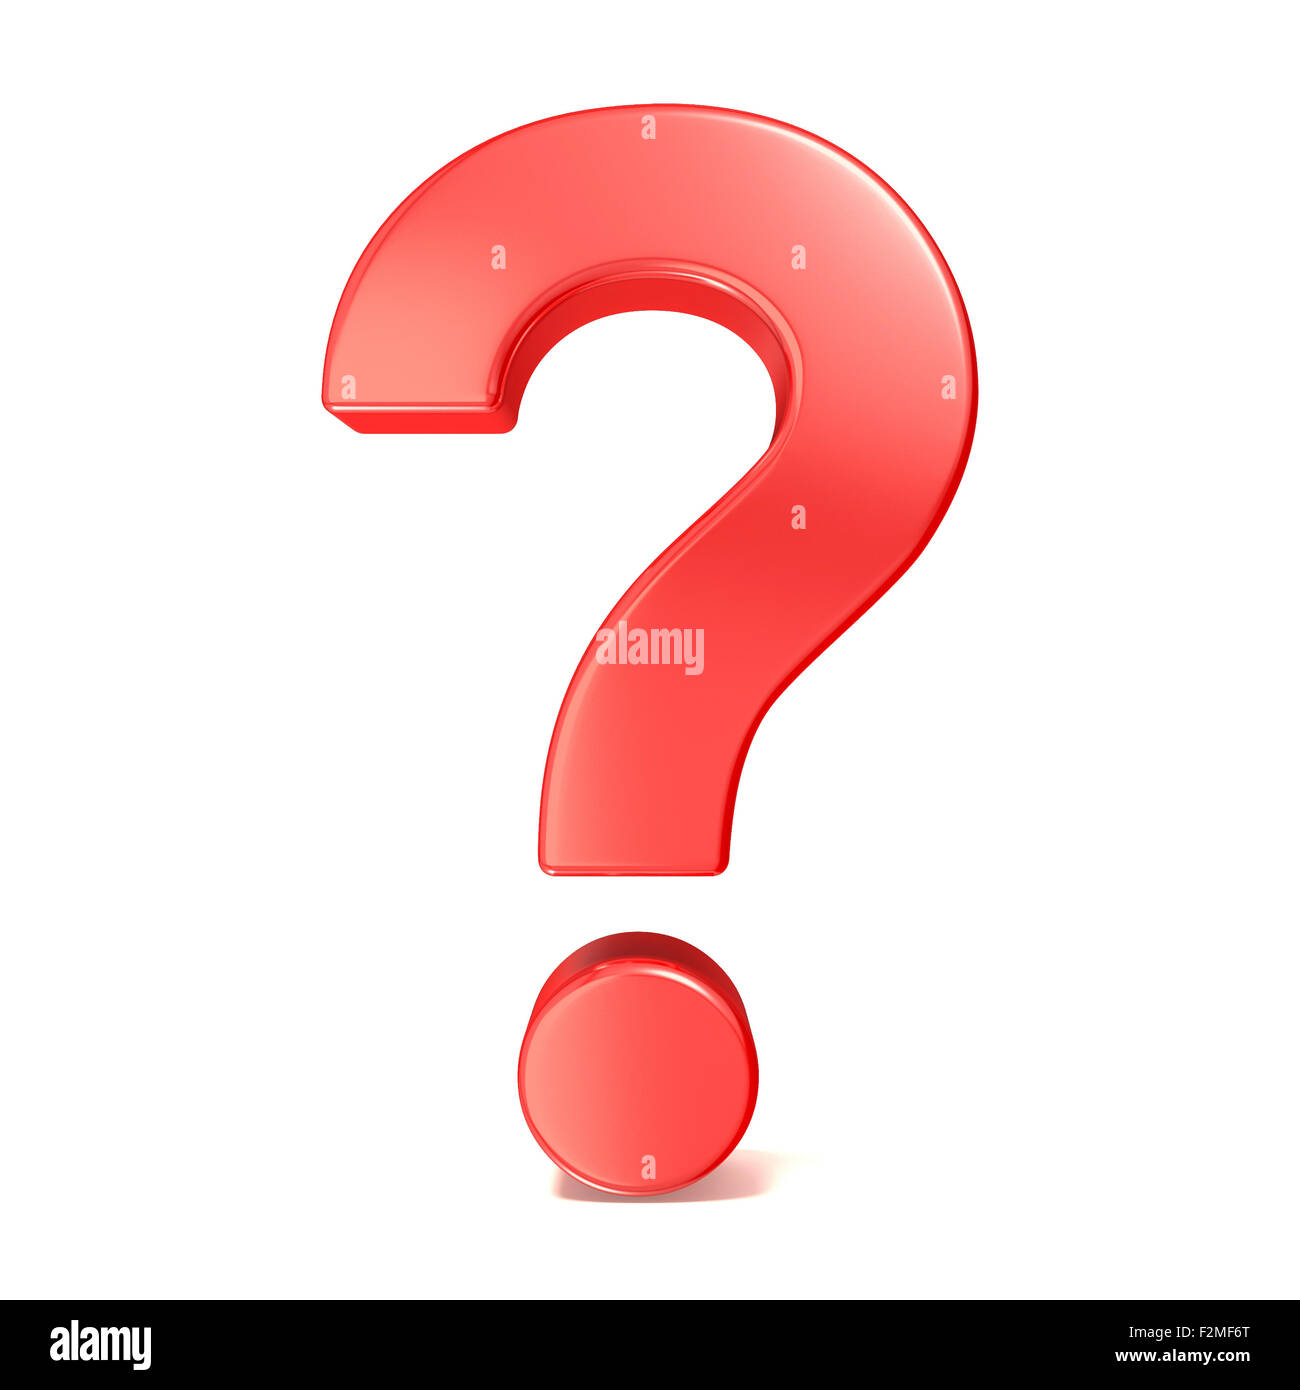 Red question mark. 3D render illustration isolated on white background Stock Photo